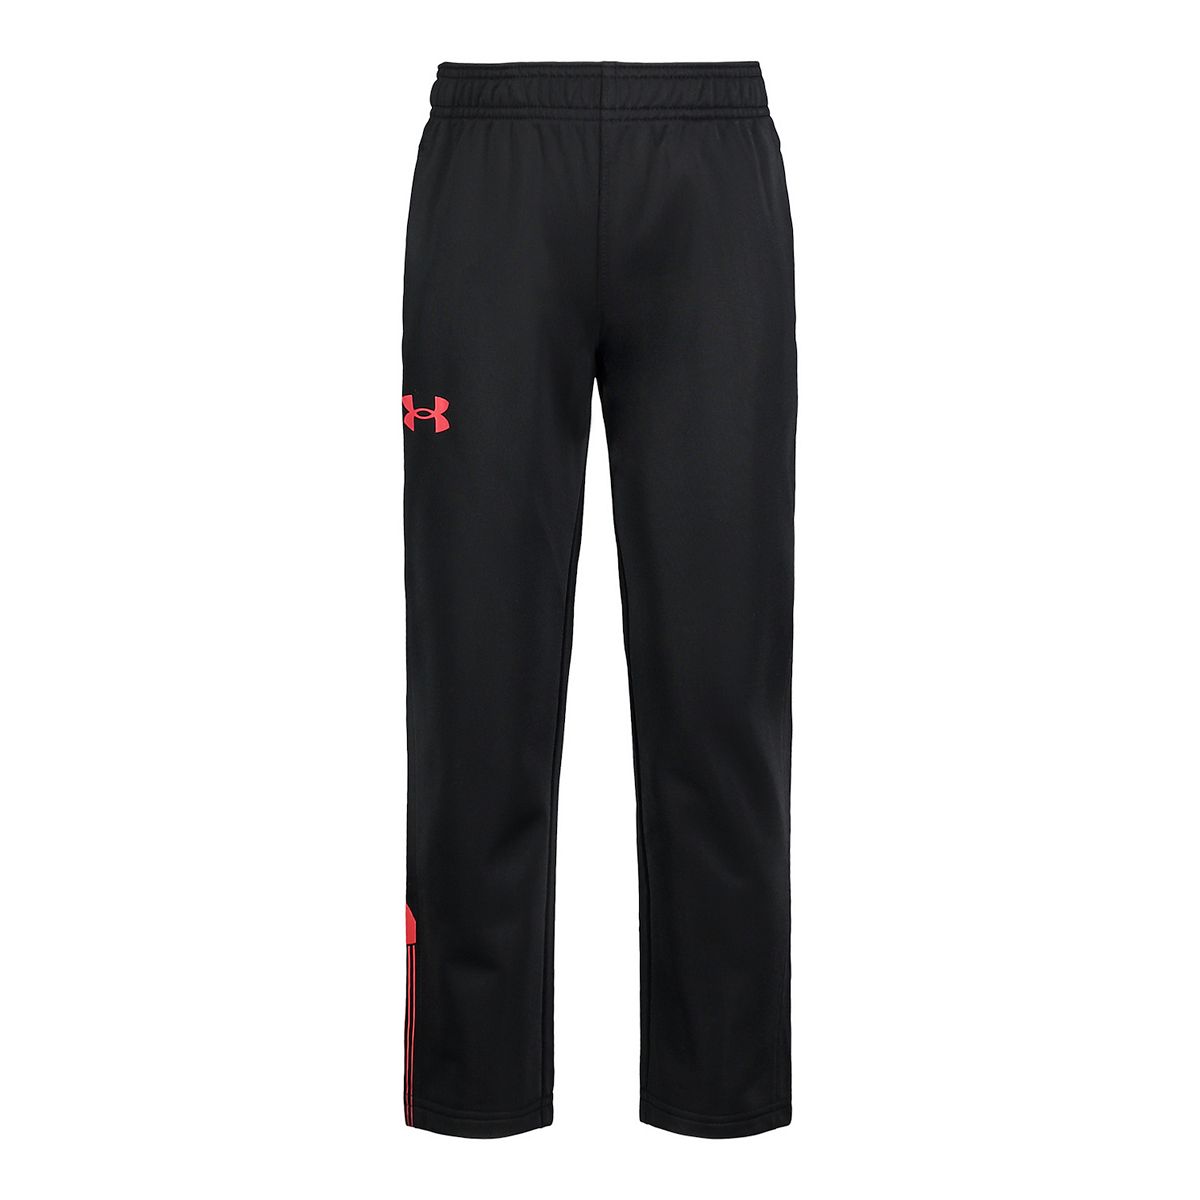 Under Armour Boys' UA Big Logo Tapered Pant - Black/Red